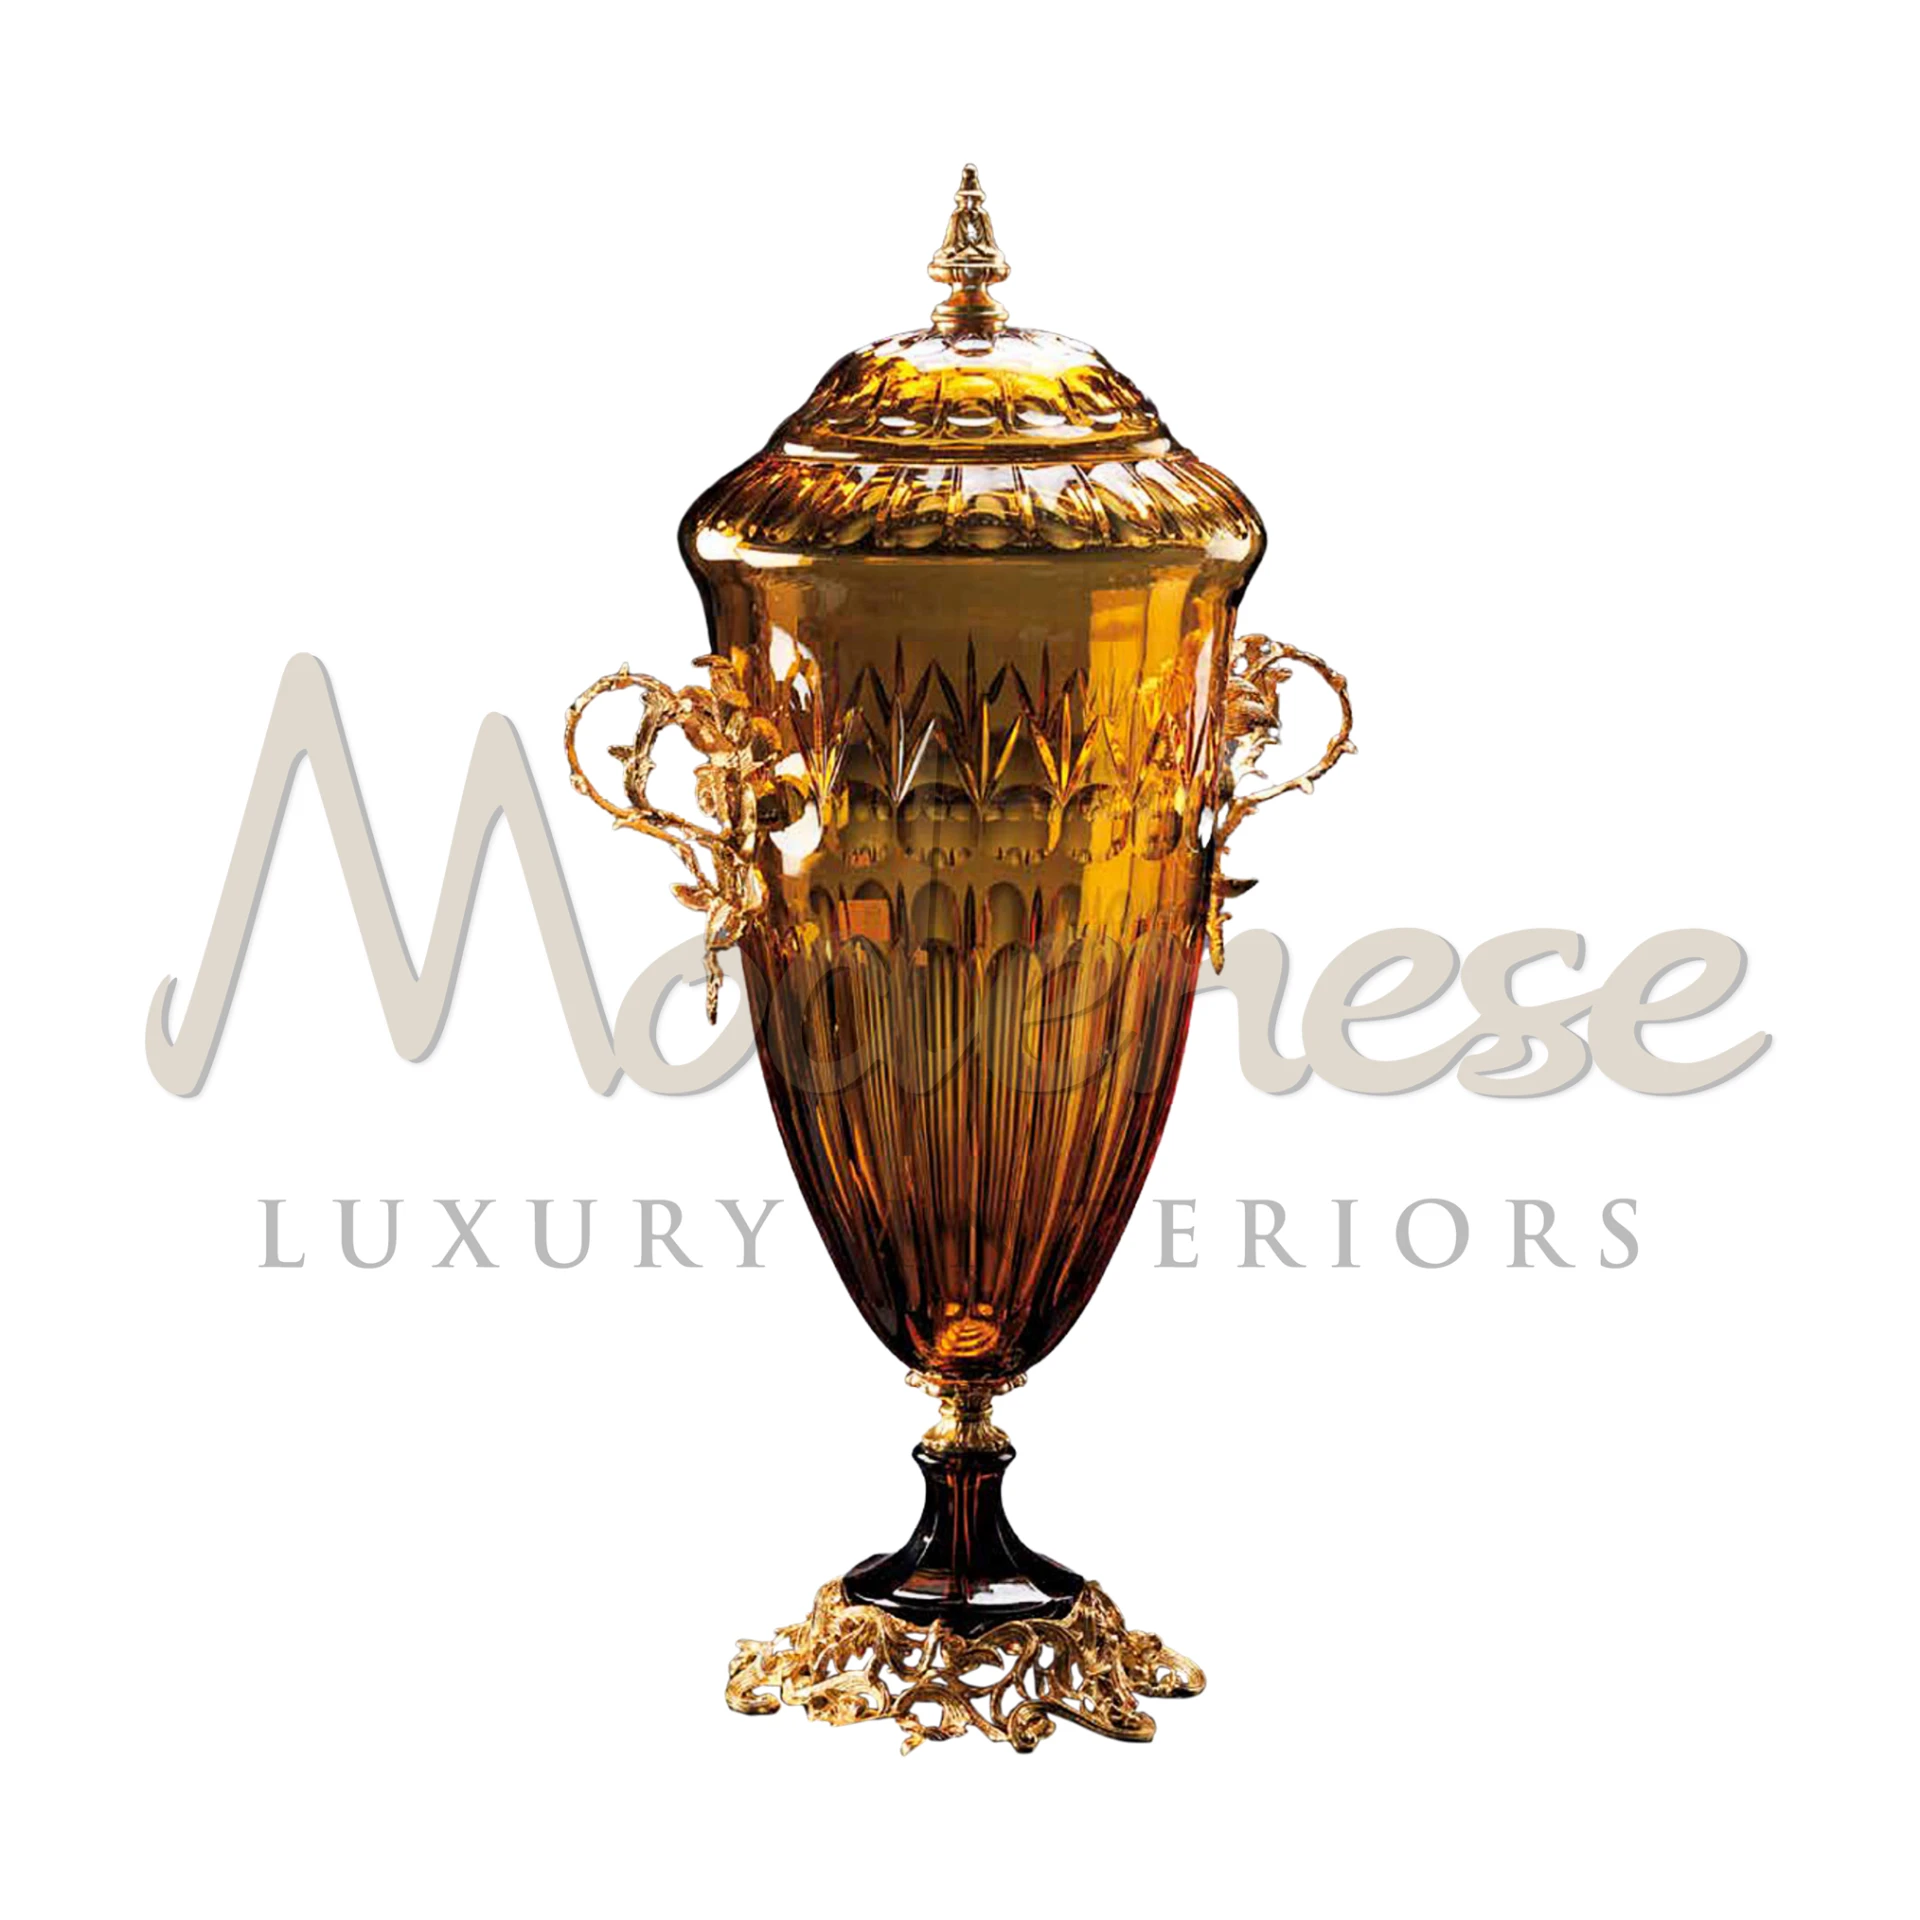 Traditional luxury vase with intricate detailing, made for grand homes and luxury interiors, symbolizing elegance and refinement in design.






